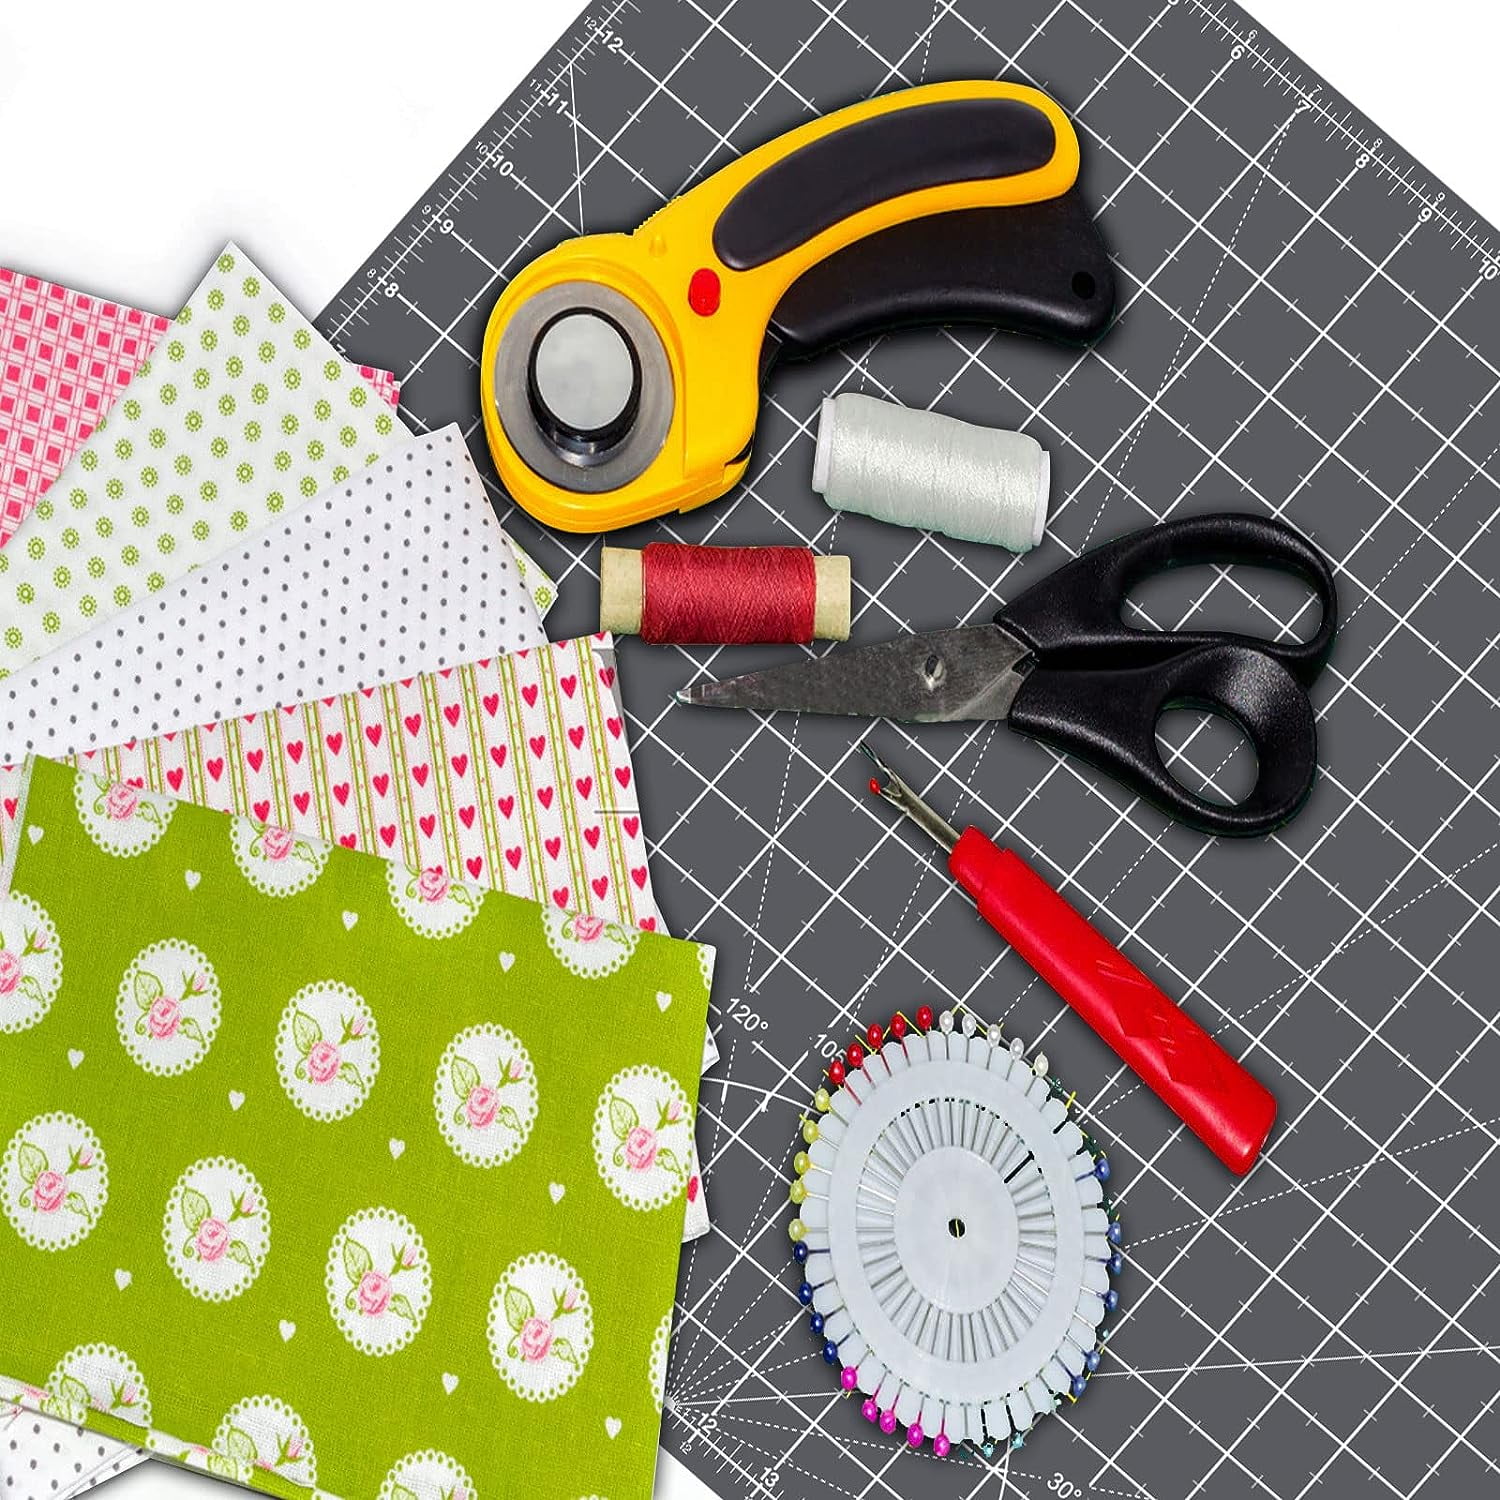 Moocorvic Cutting Mat for Crafts, Cutting Mat for Sewing Double